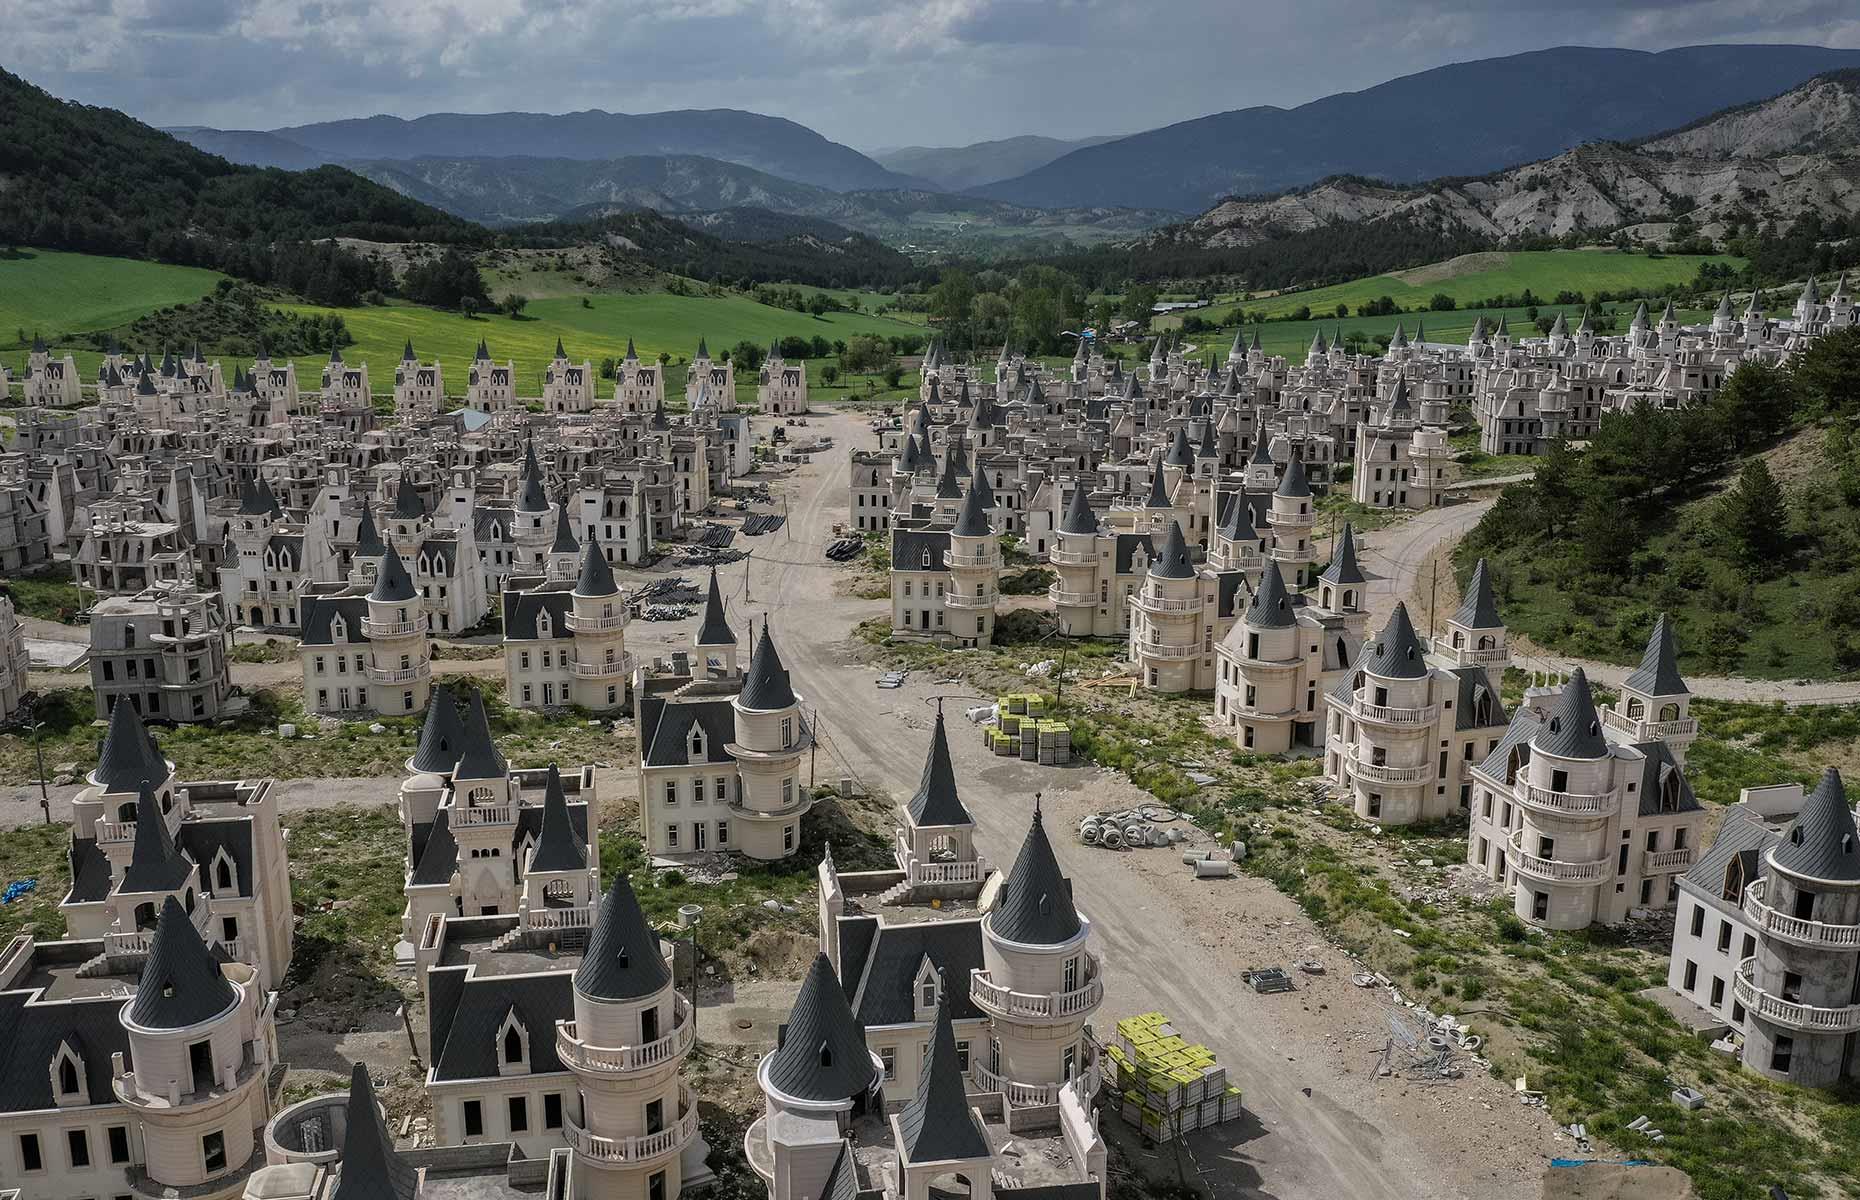 Burj Al Babas: tour the ghost town of abandoned fairytale castles |  loveproperty.com